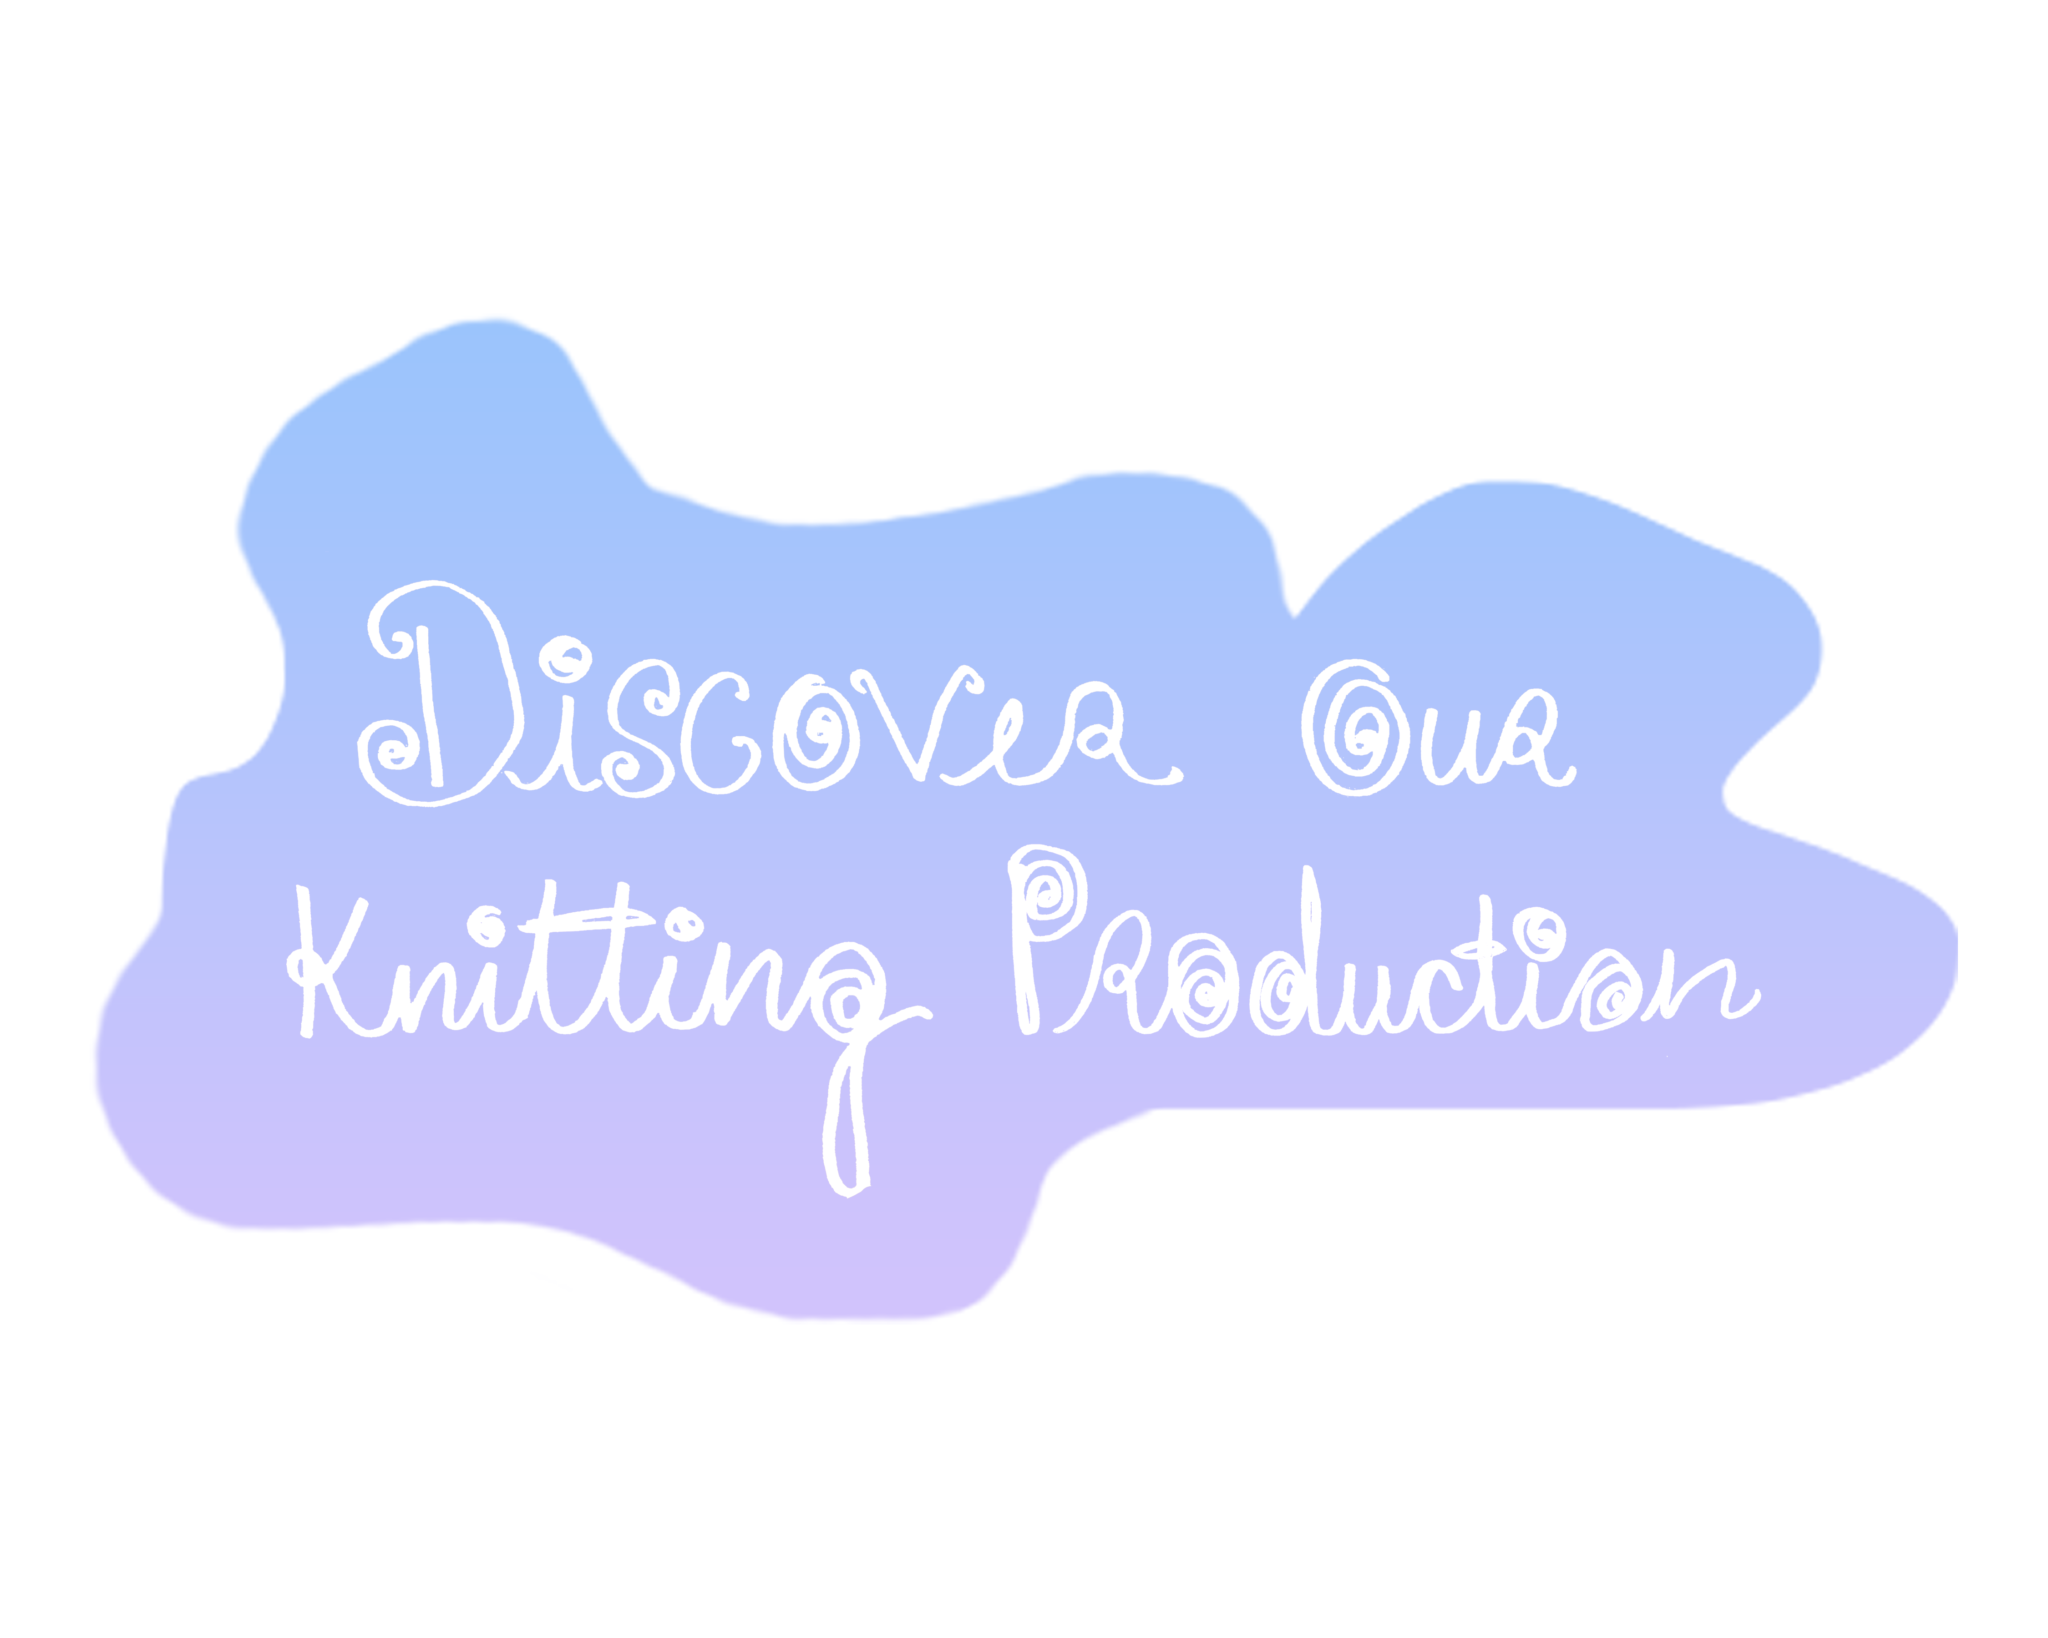 Discover our knitting production